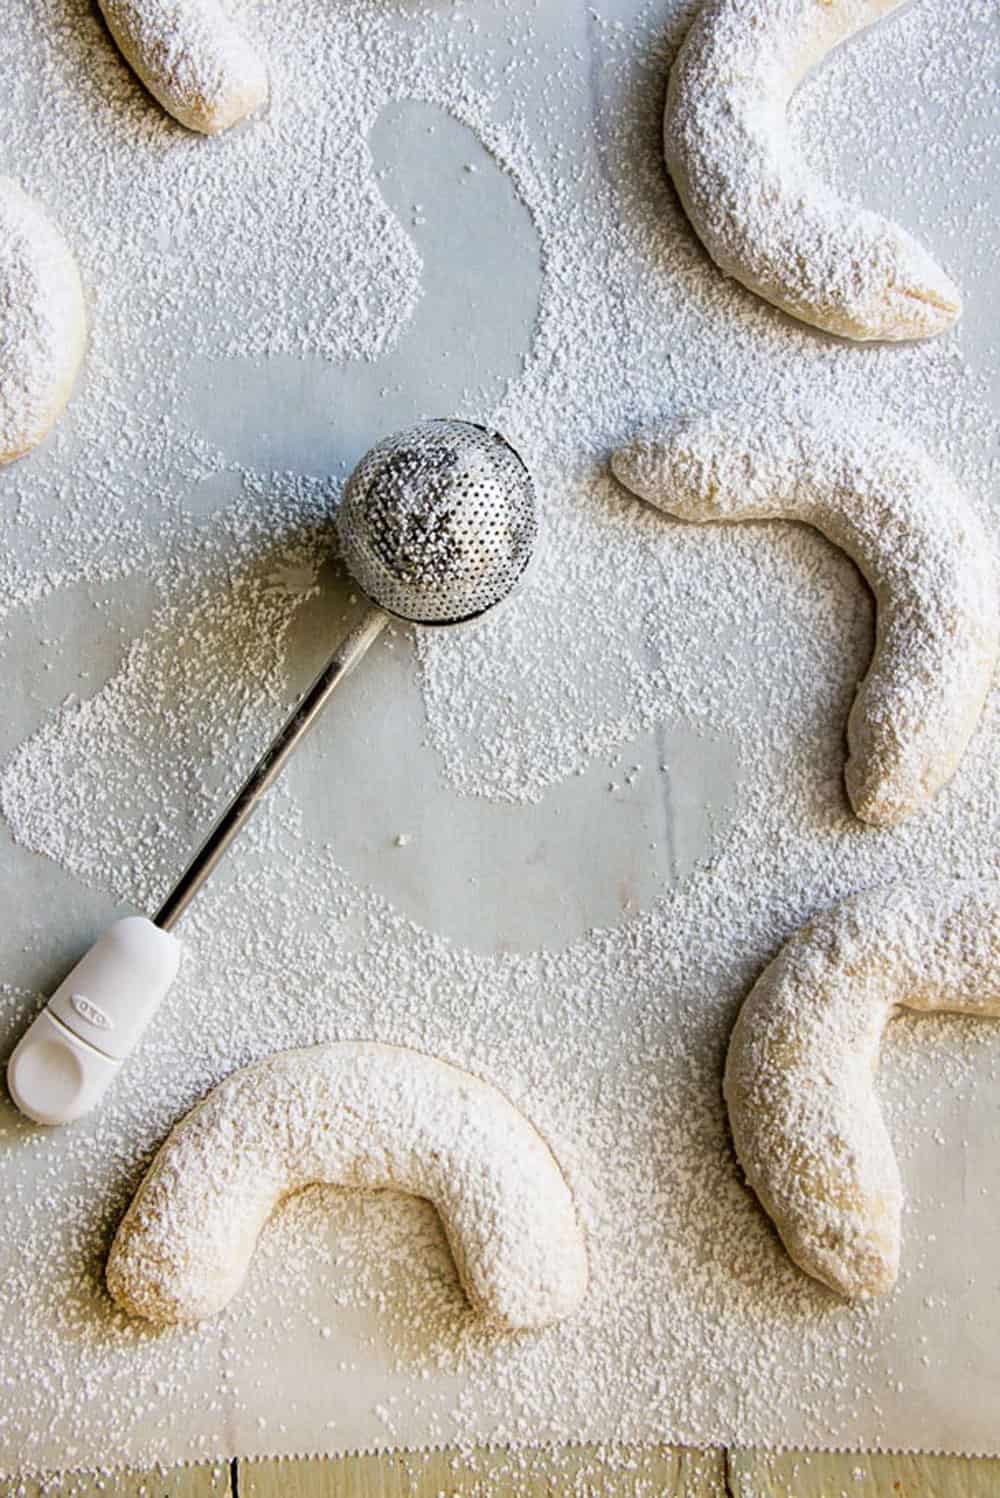 6 almond crescent cookies on a piece of parchment paper with a metal sugar duster